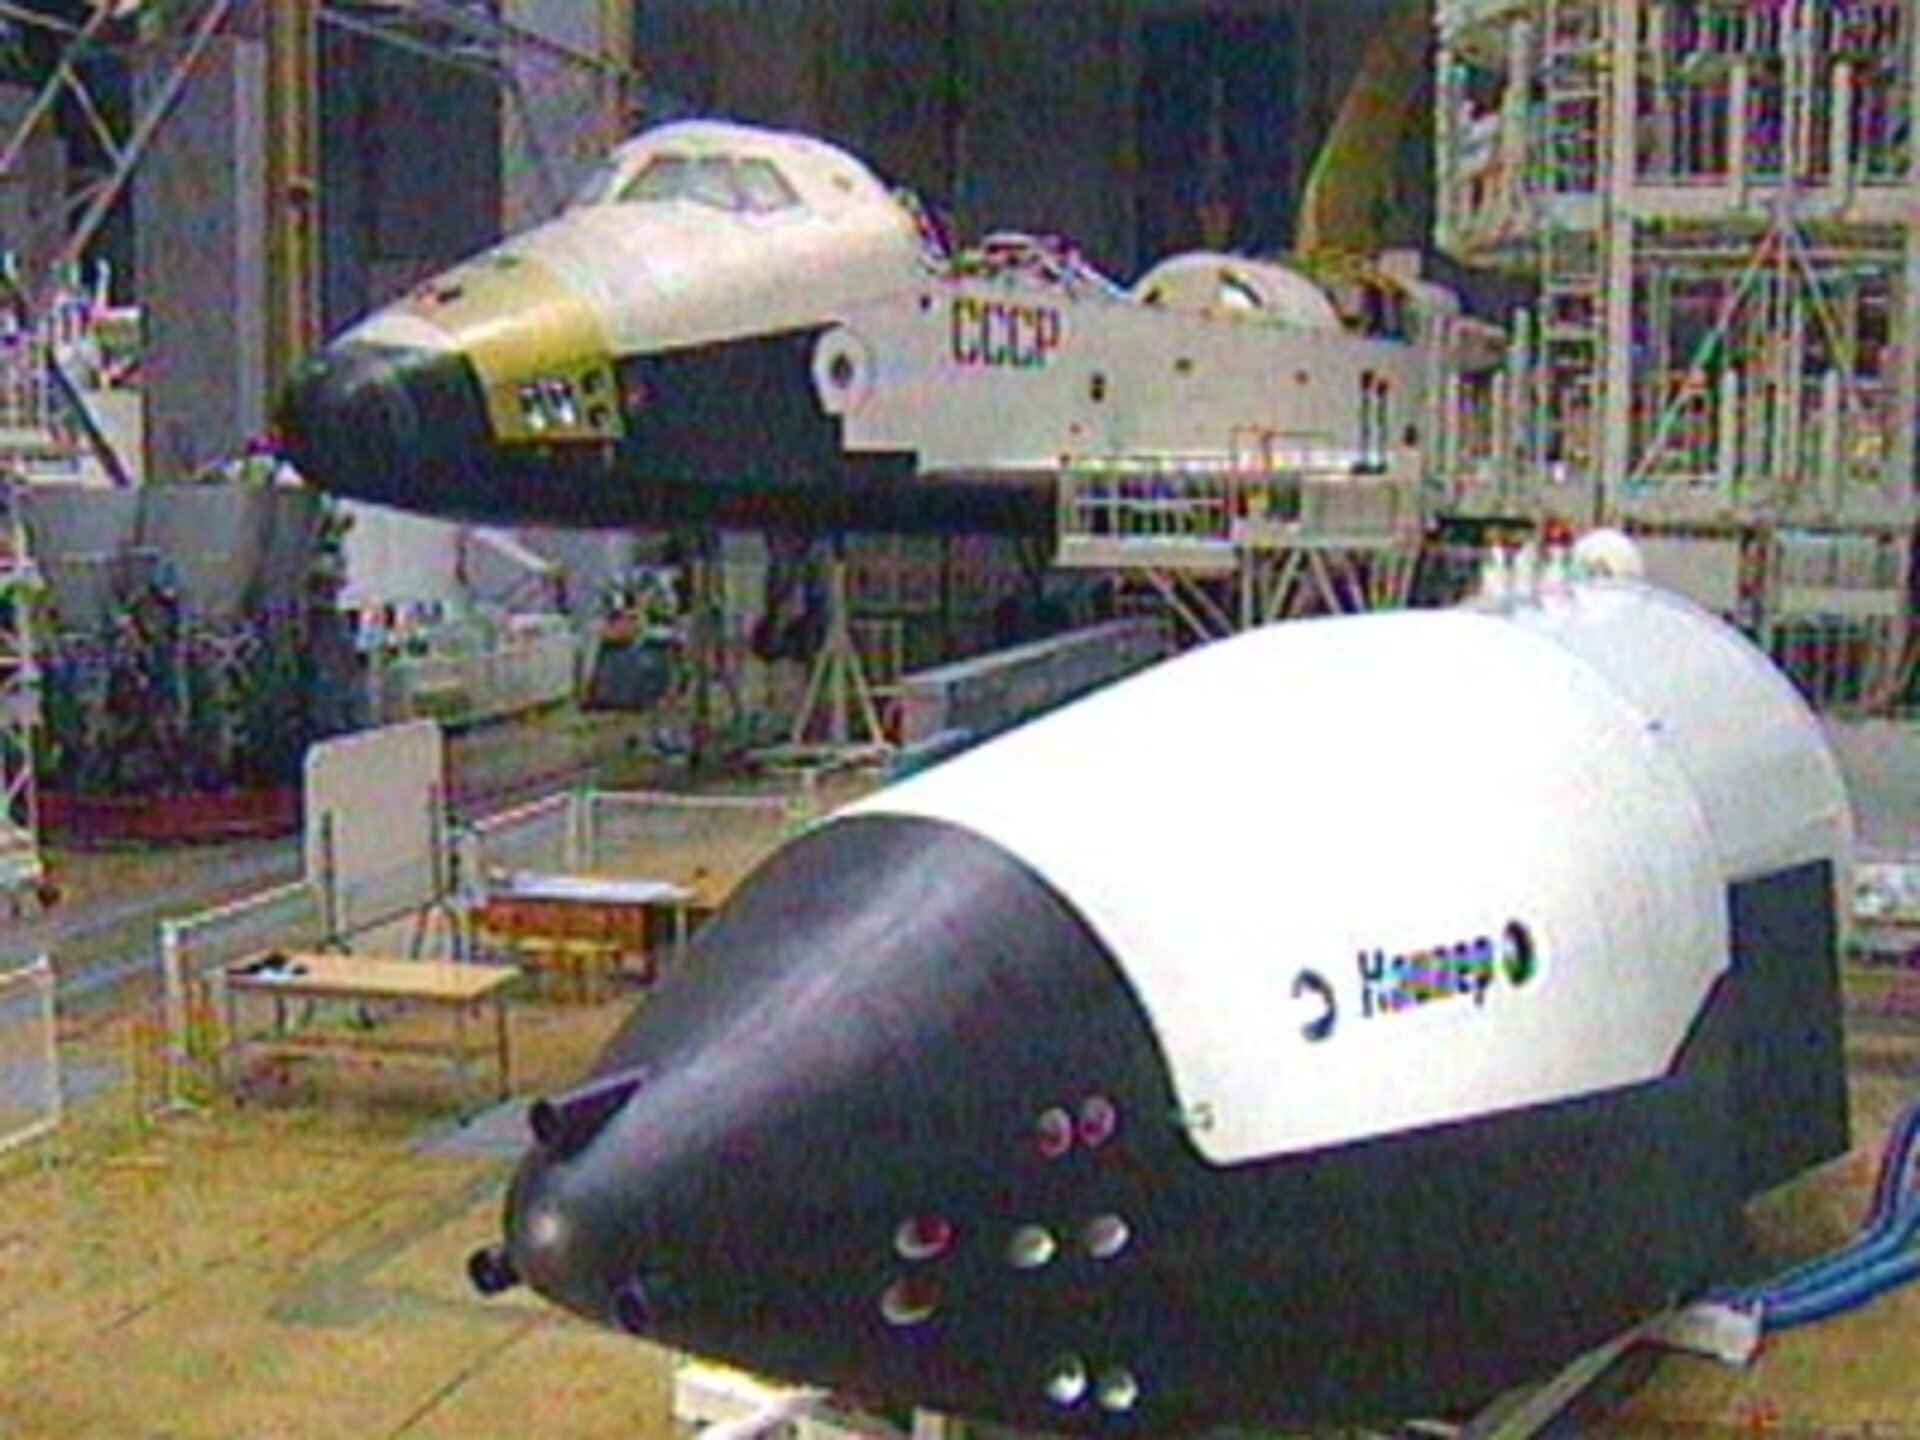 Full scale mockup of Kliper, with the old Buran Shuttle, in the RKK